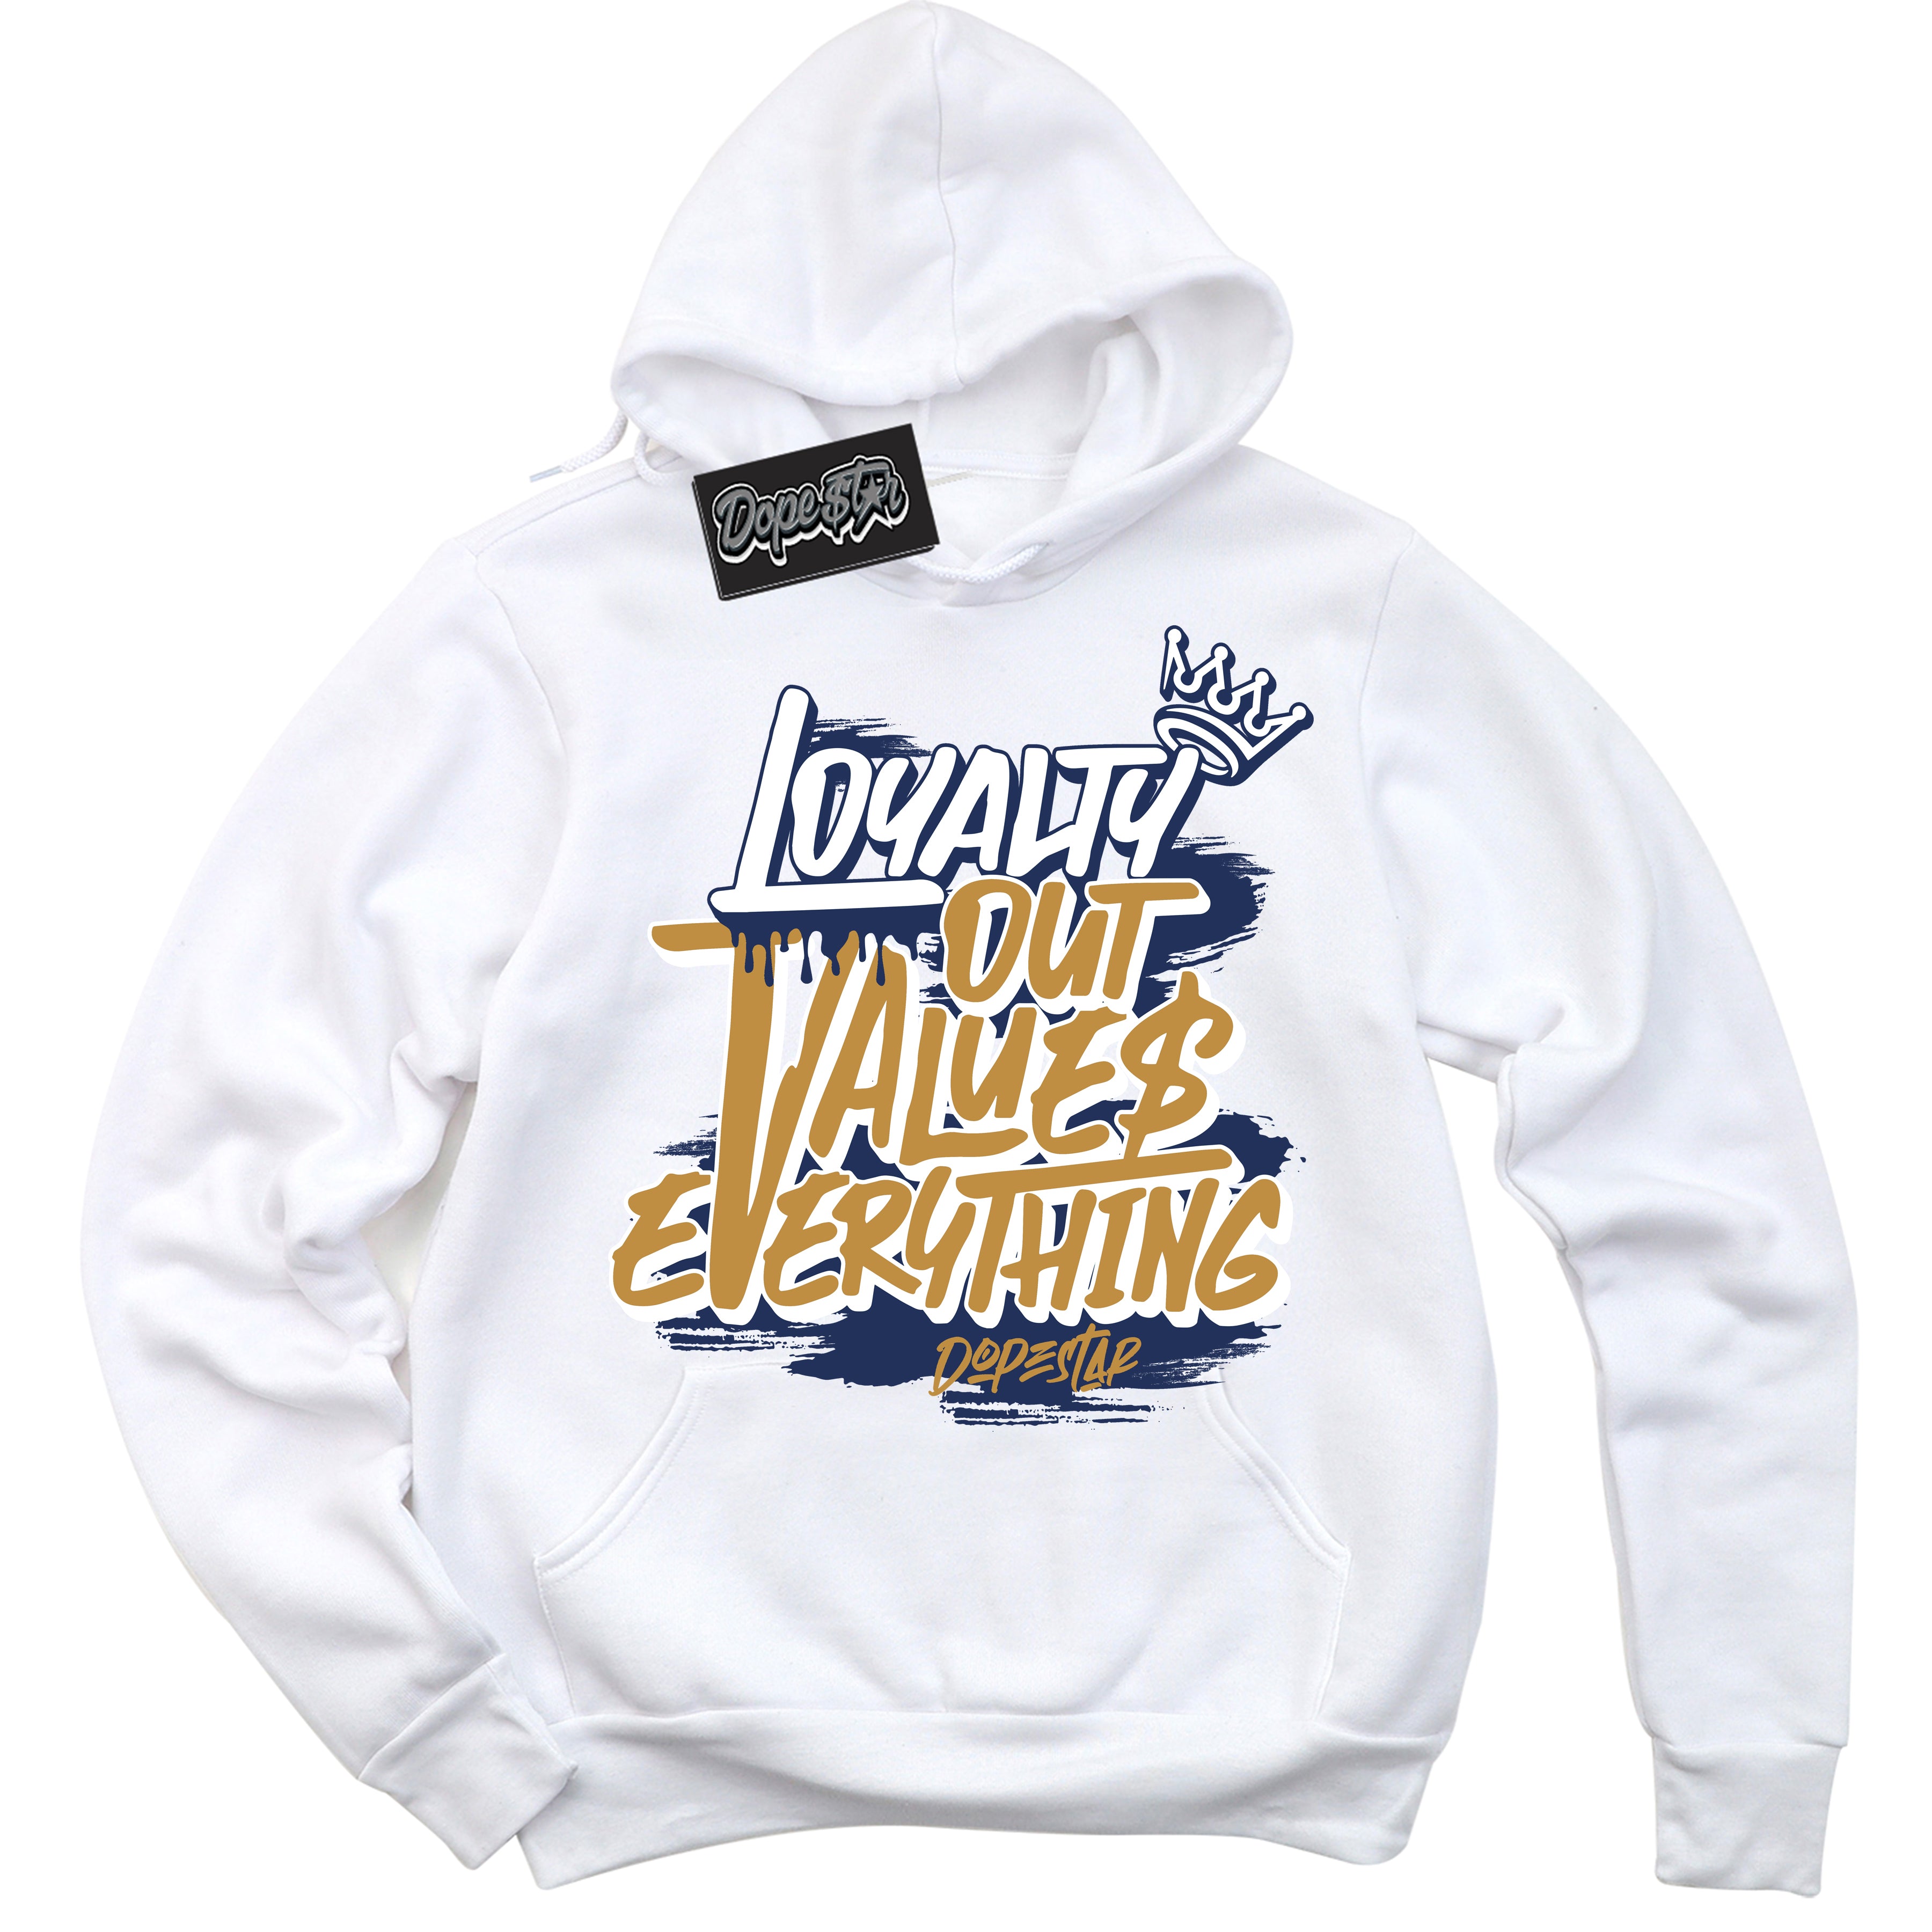 Cool White Hoodie with “ Loyalty Out Values Everything ”  design that Perfectly Matches Orange Label Navy Gum Sneakers.